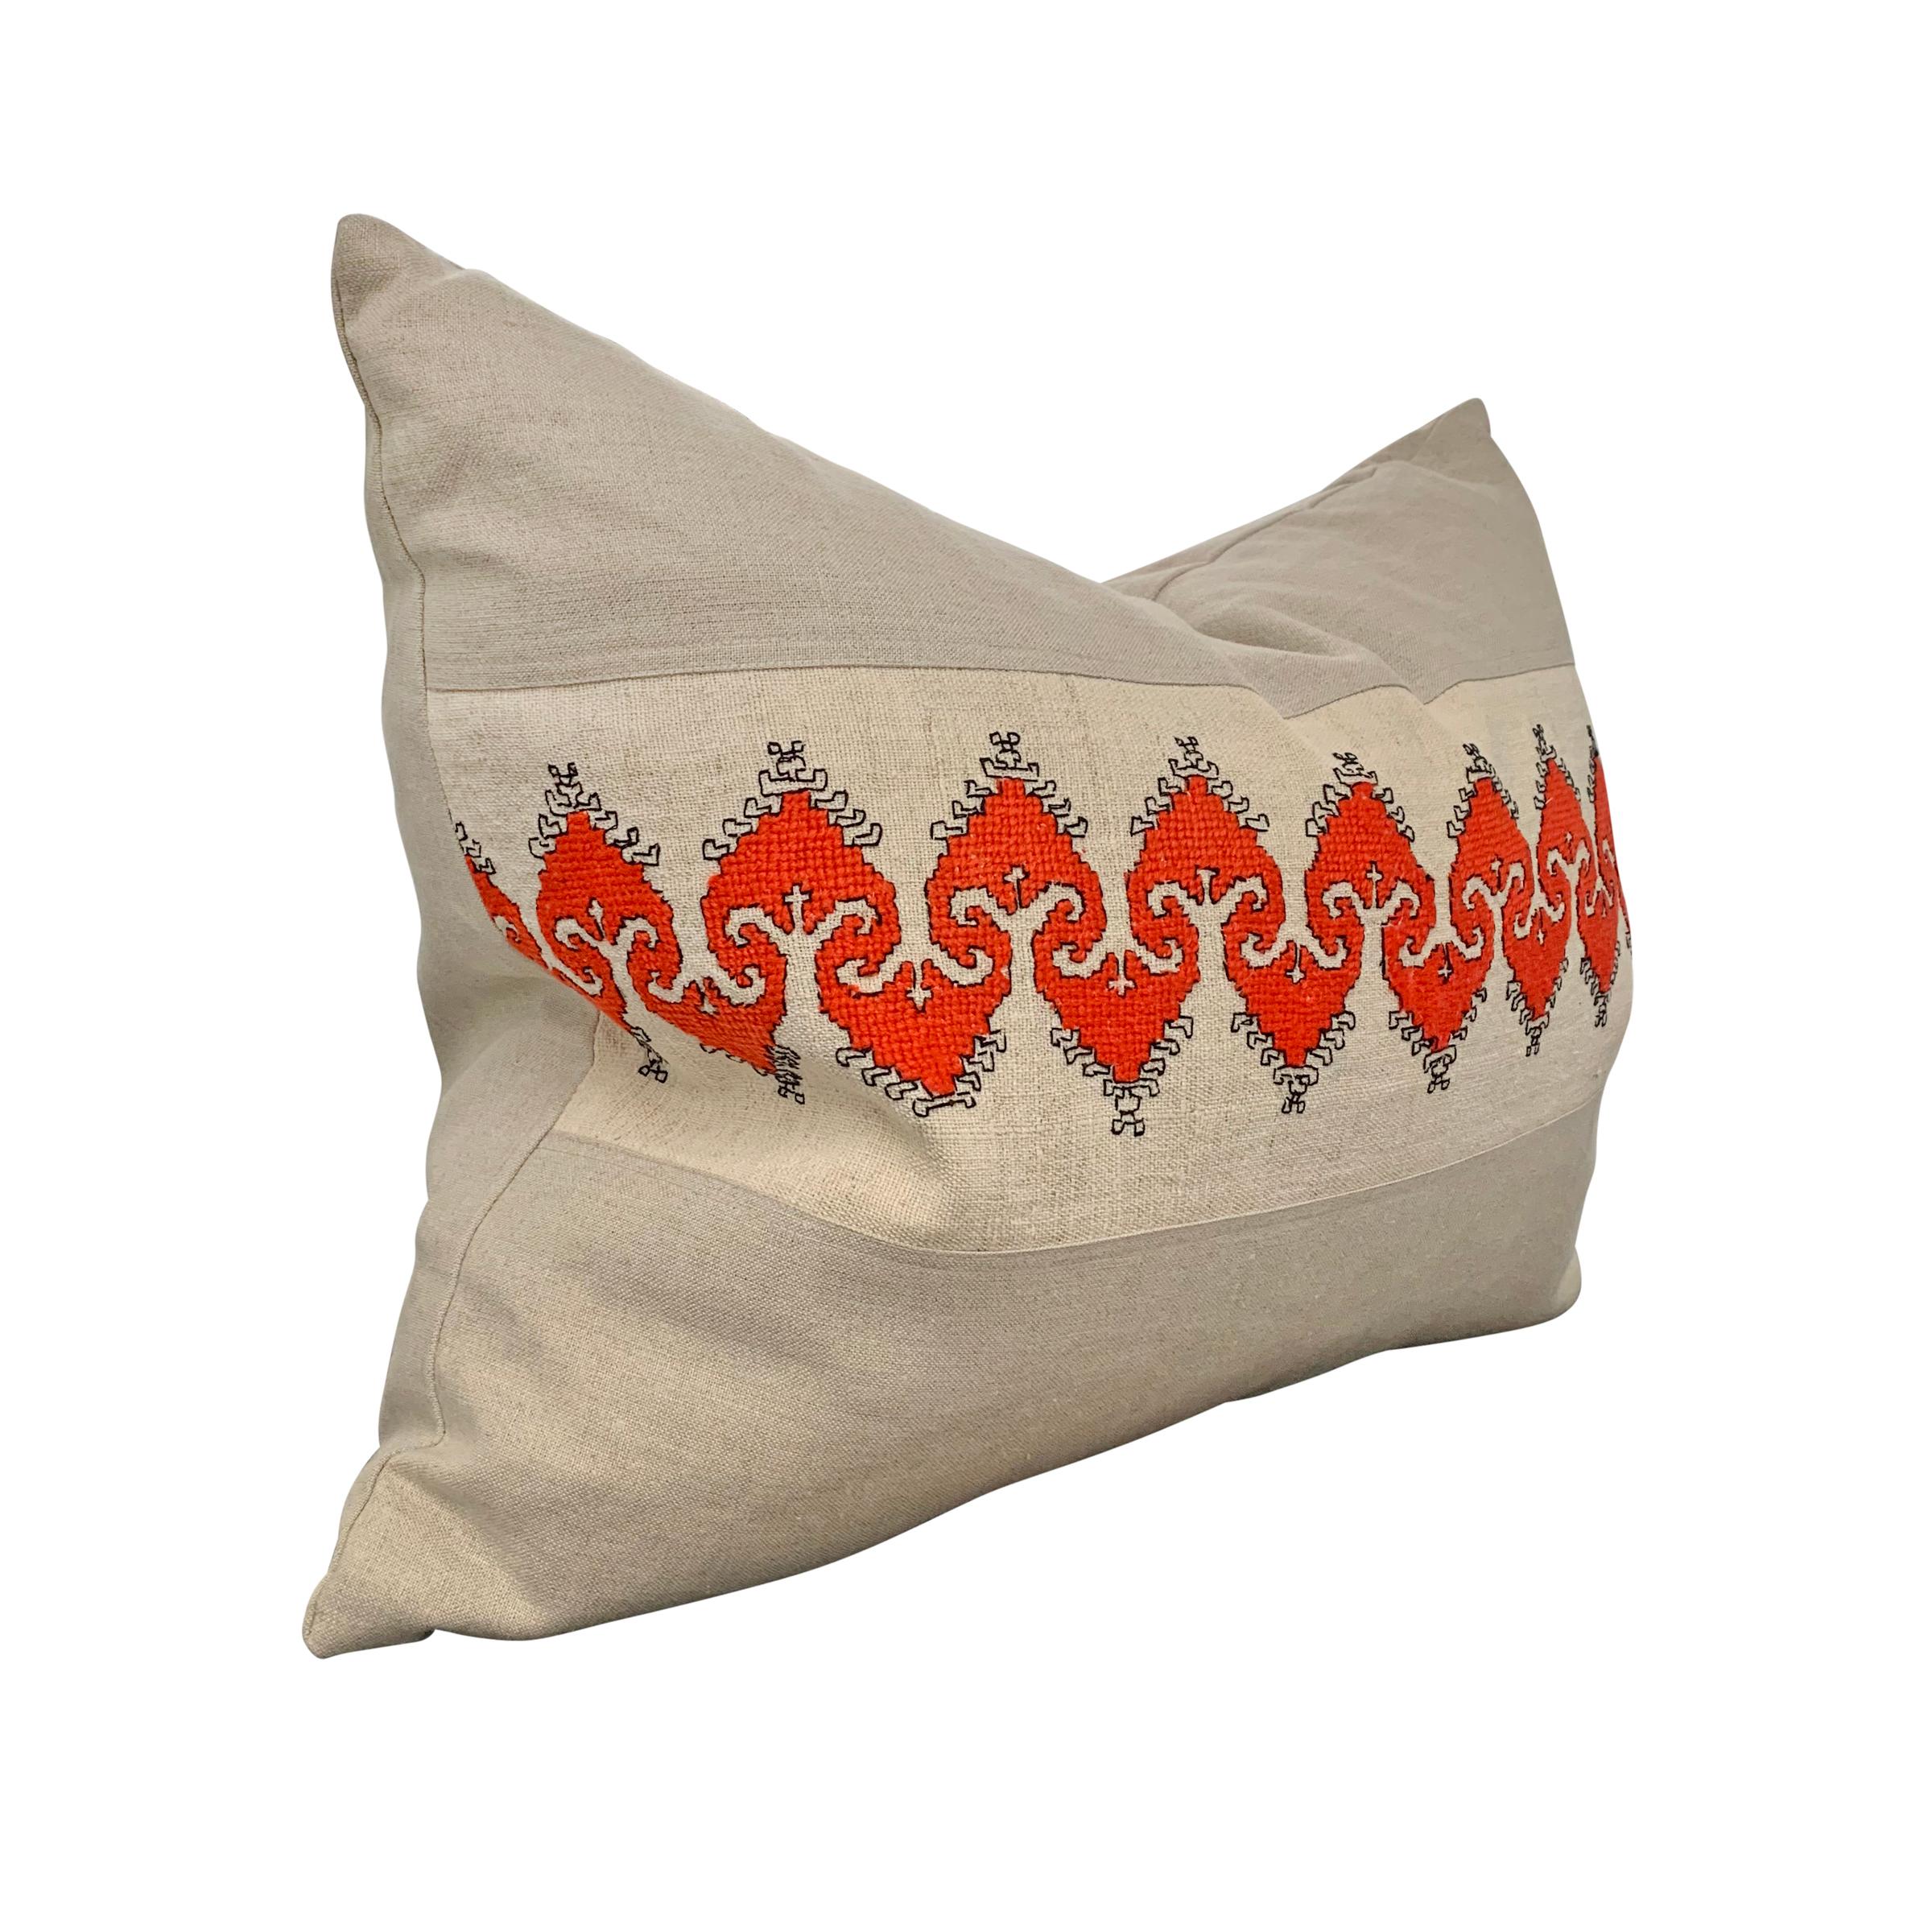 Folk Art Pair of Early 20th Century Bulgarian Embroidered Pillows